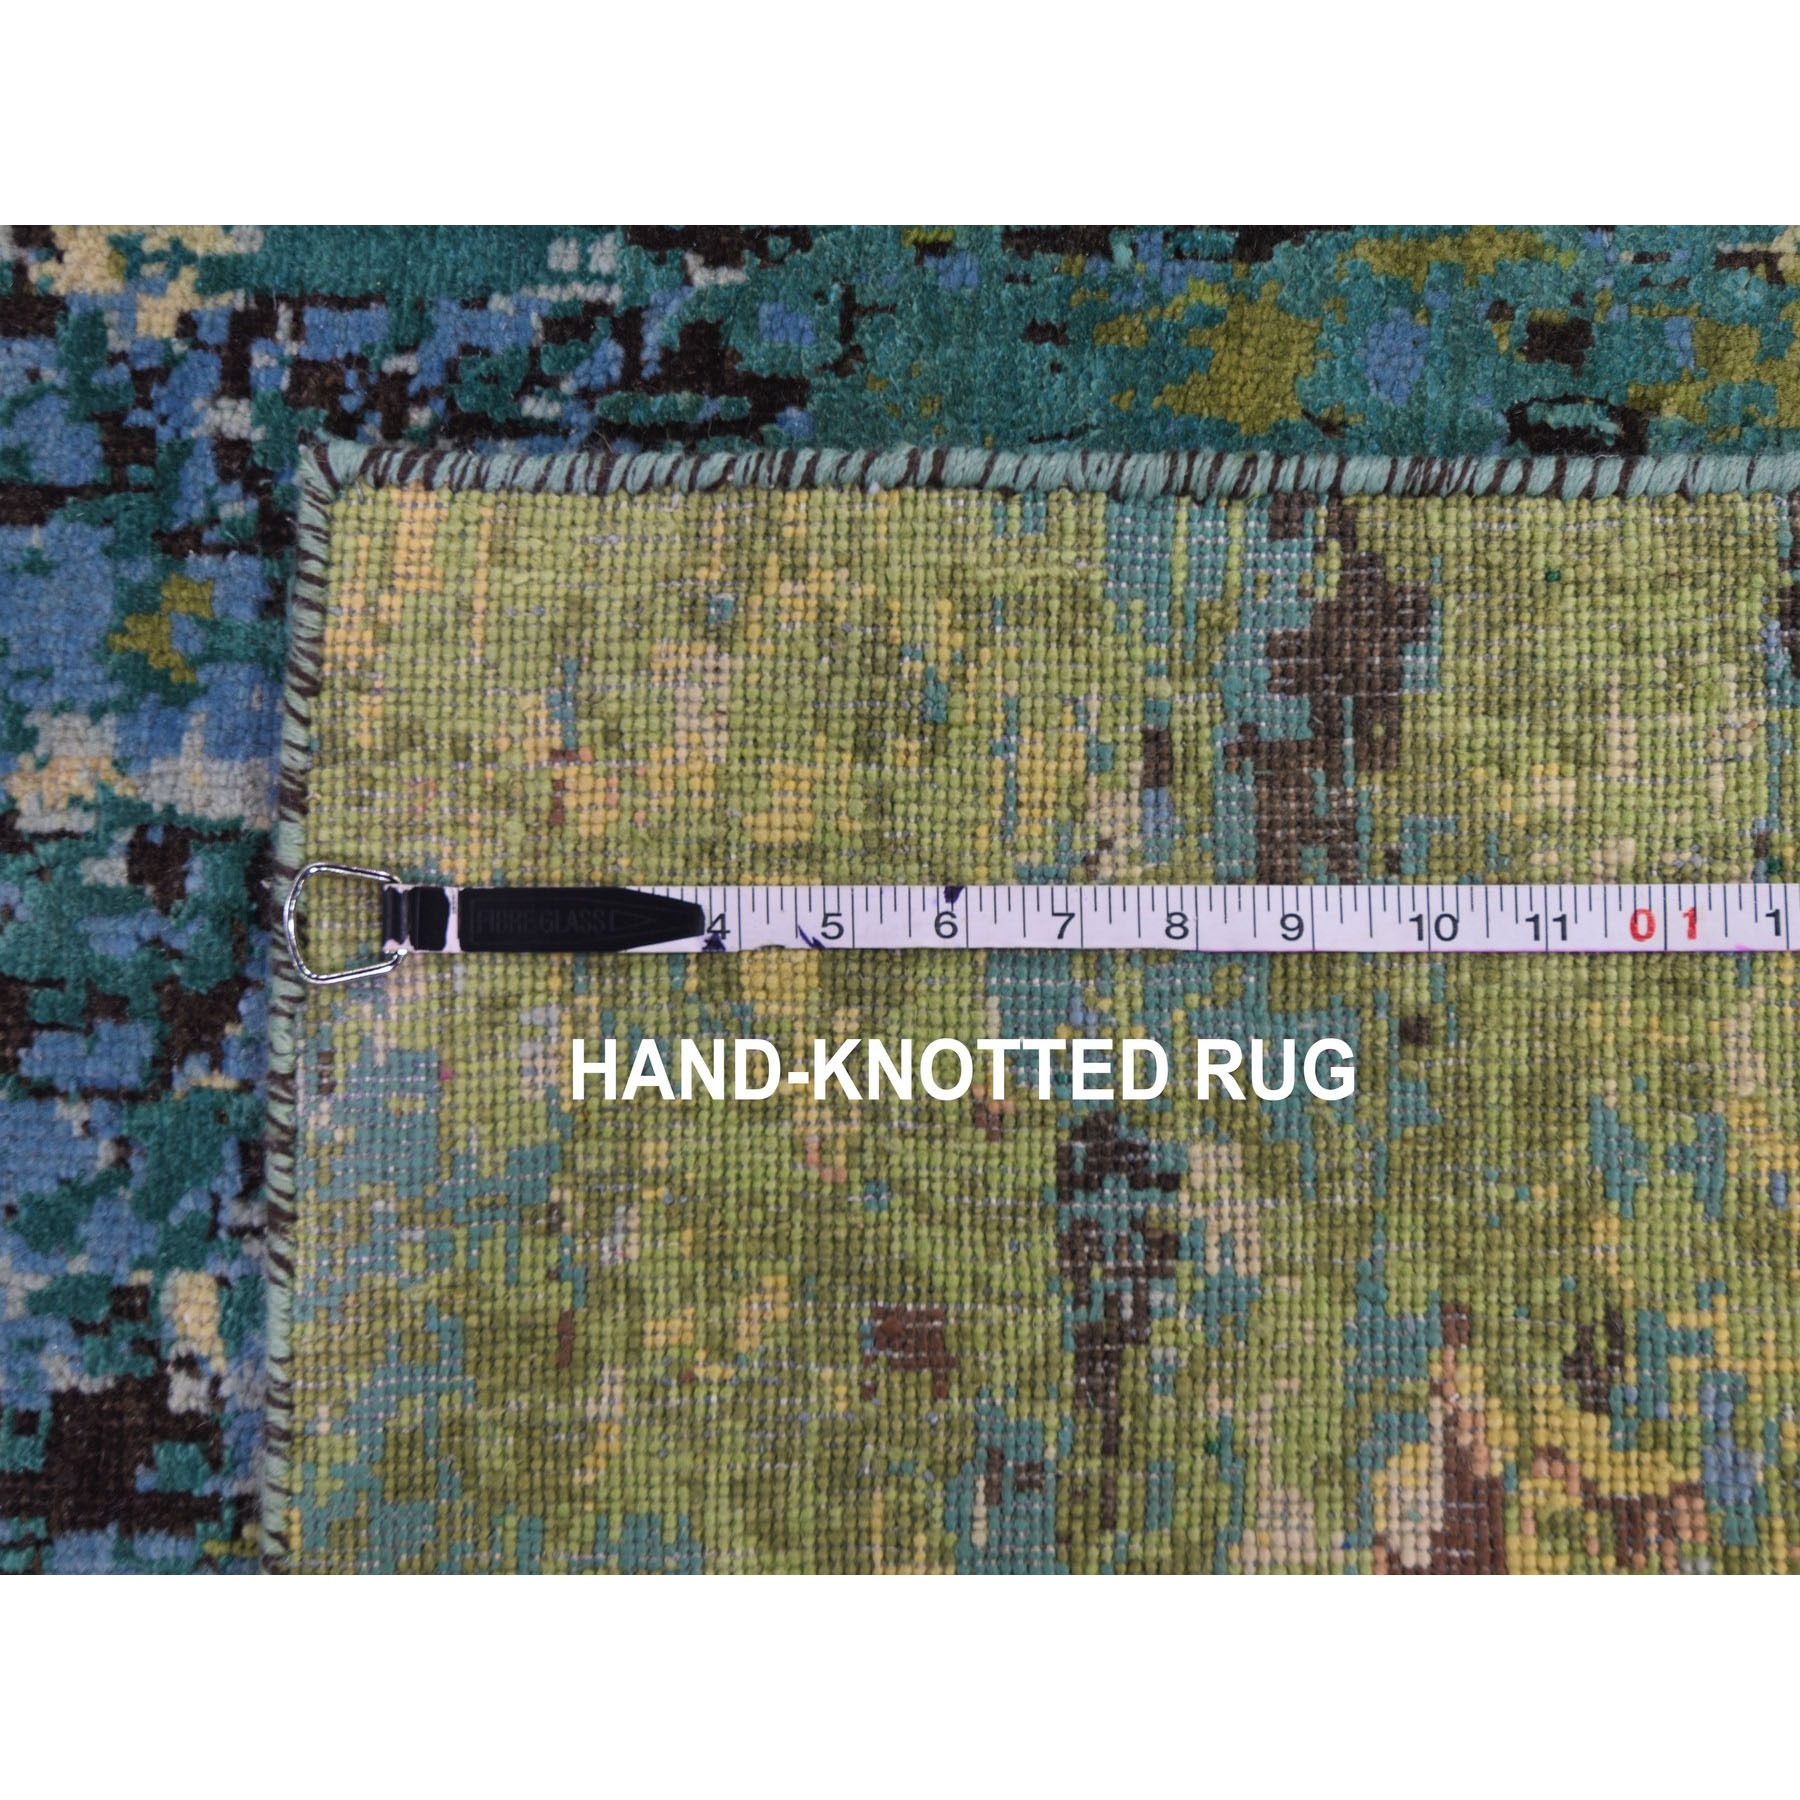 8-10 x12- THE FOREST, Wool And Silk Abstract With Greens Hand Knotted Oriental Rug 